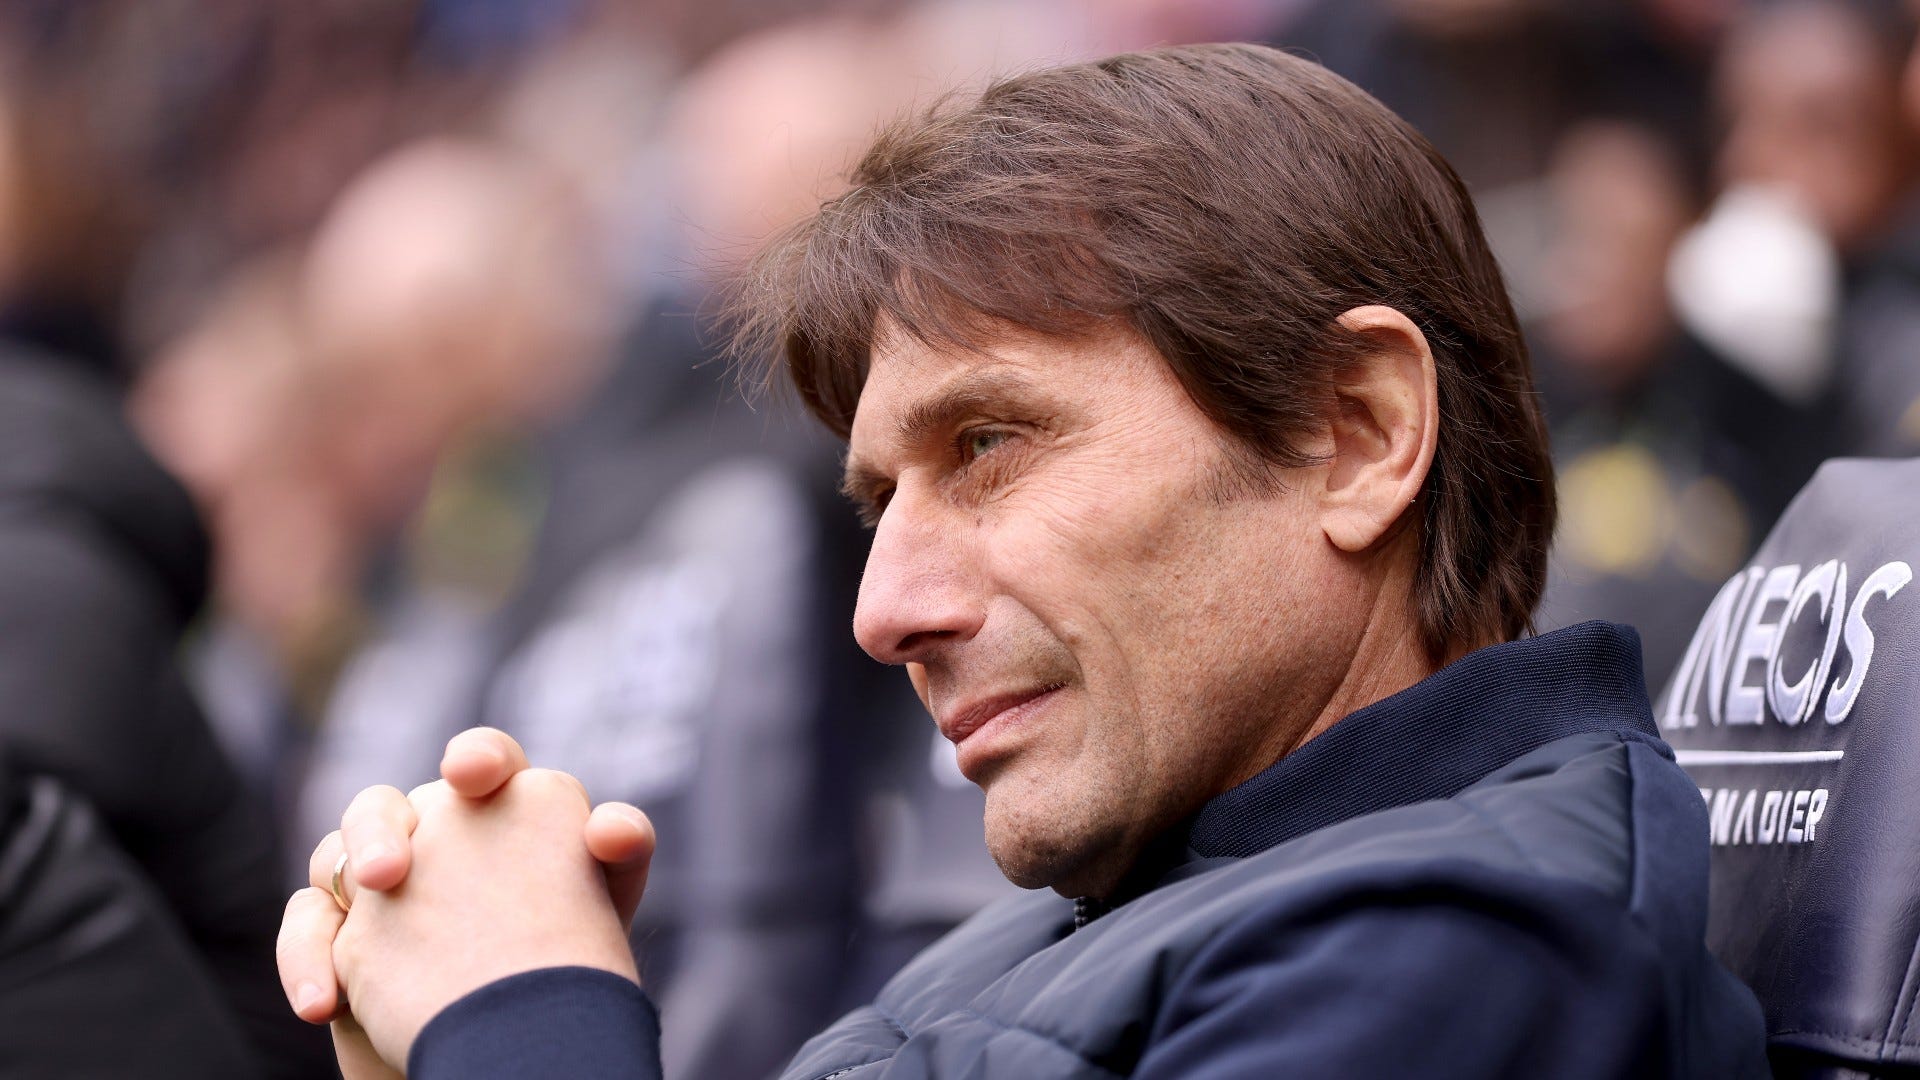 Antonio Conte rejects initial approach from Roma - Get Italian